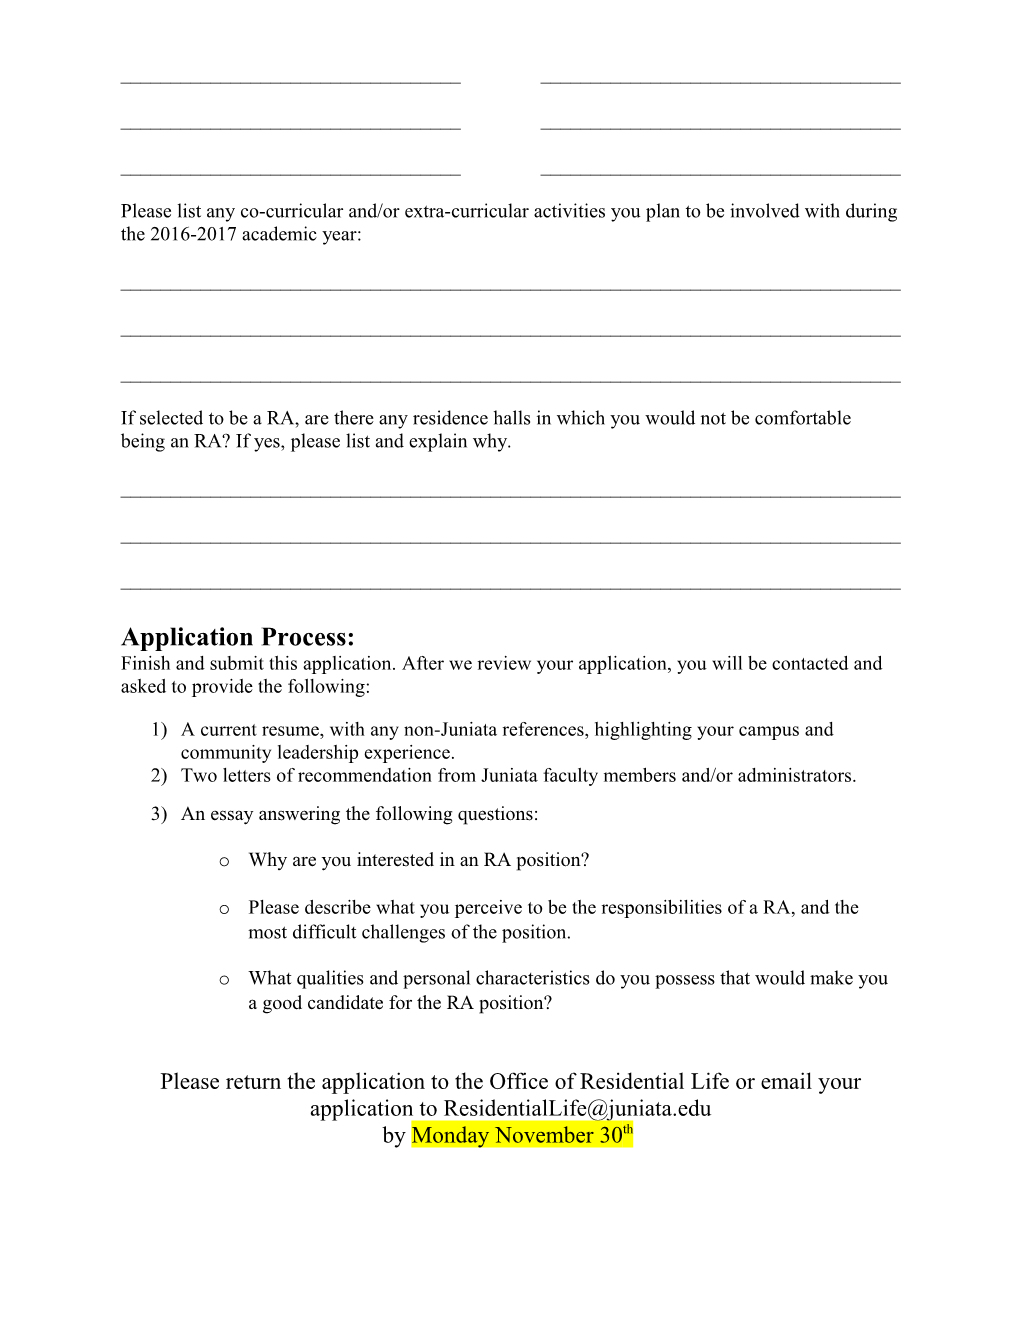 Resident Assistant Application s1